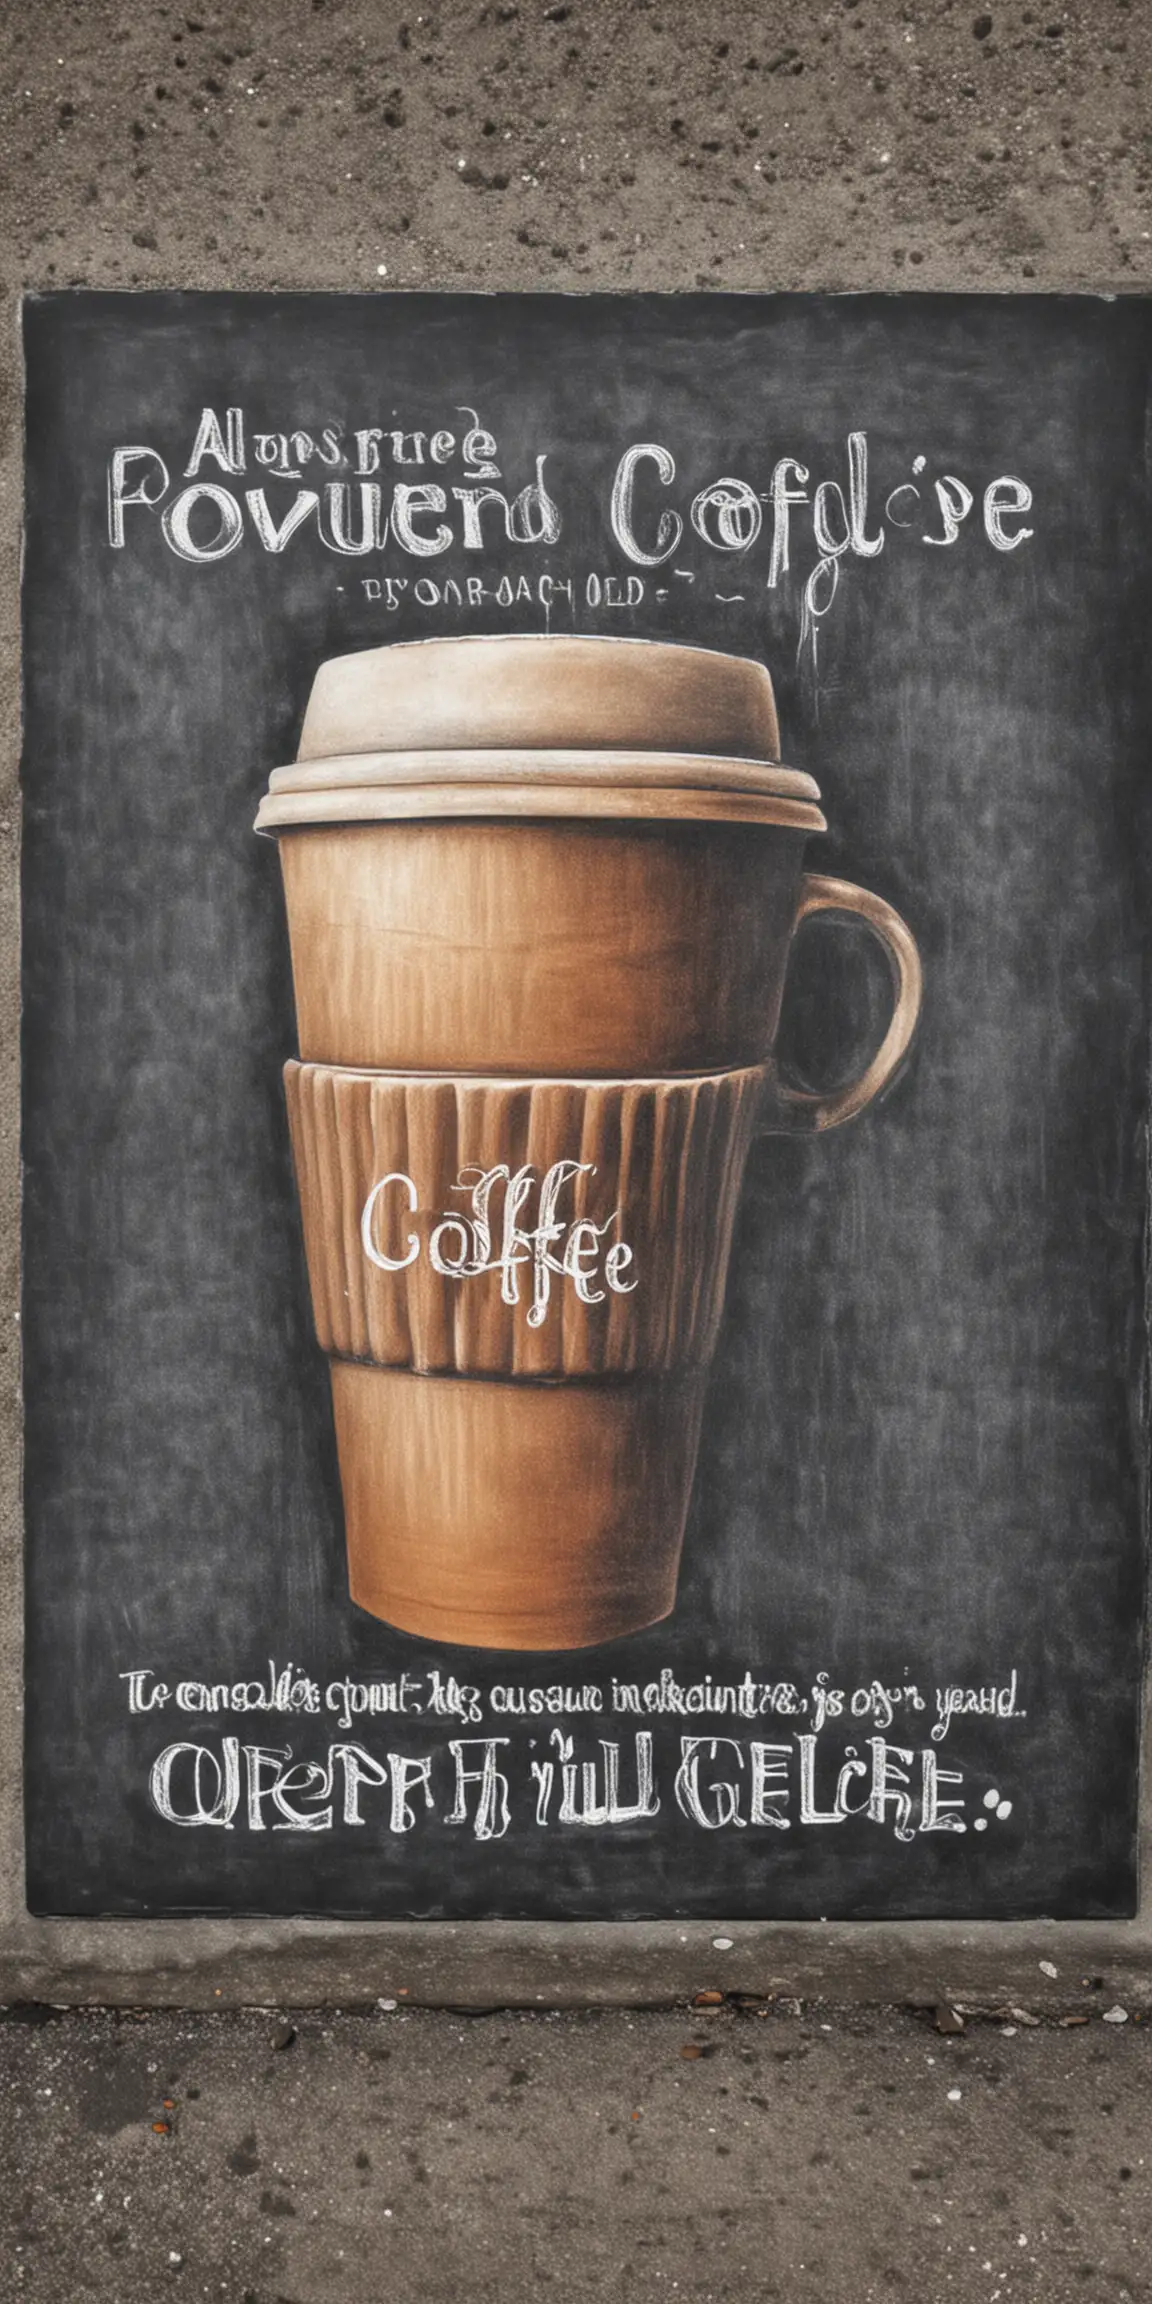 Chalk Art Poster Enjoying Overpriced Coffee with Quirky Charm